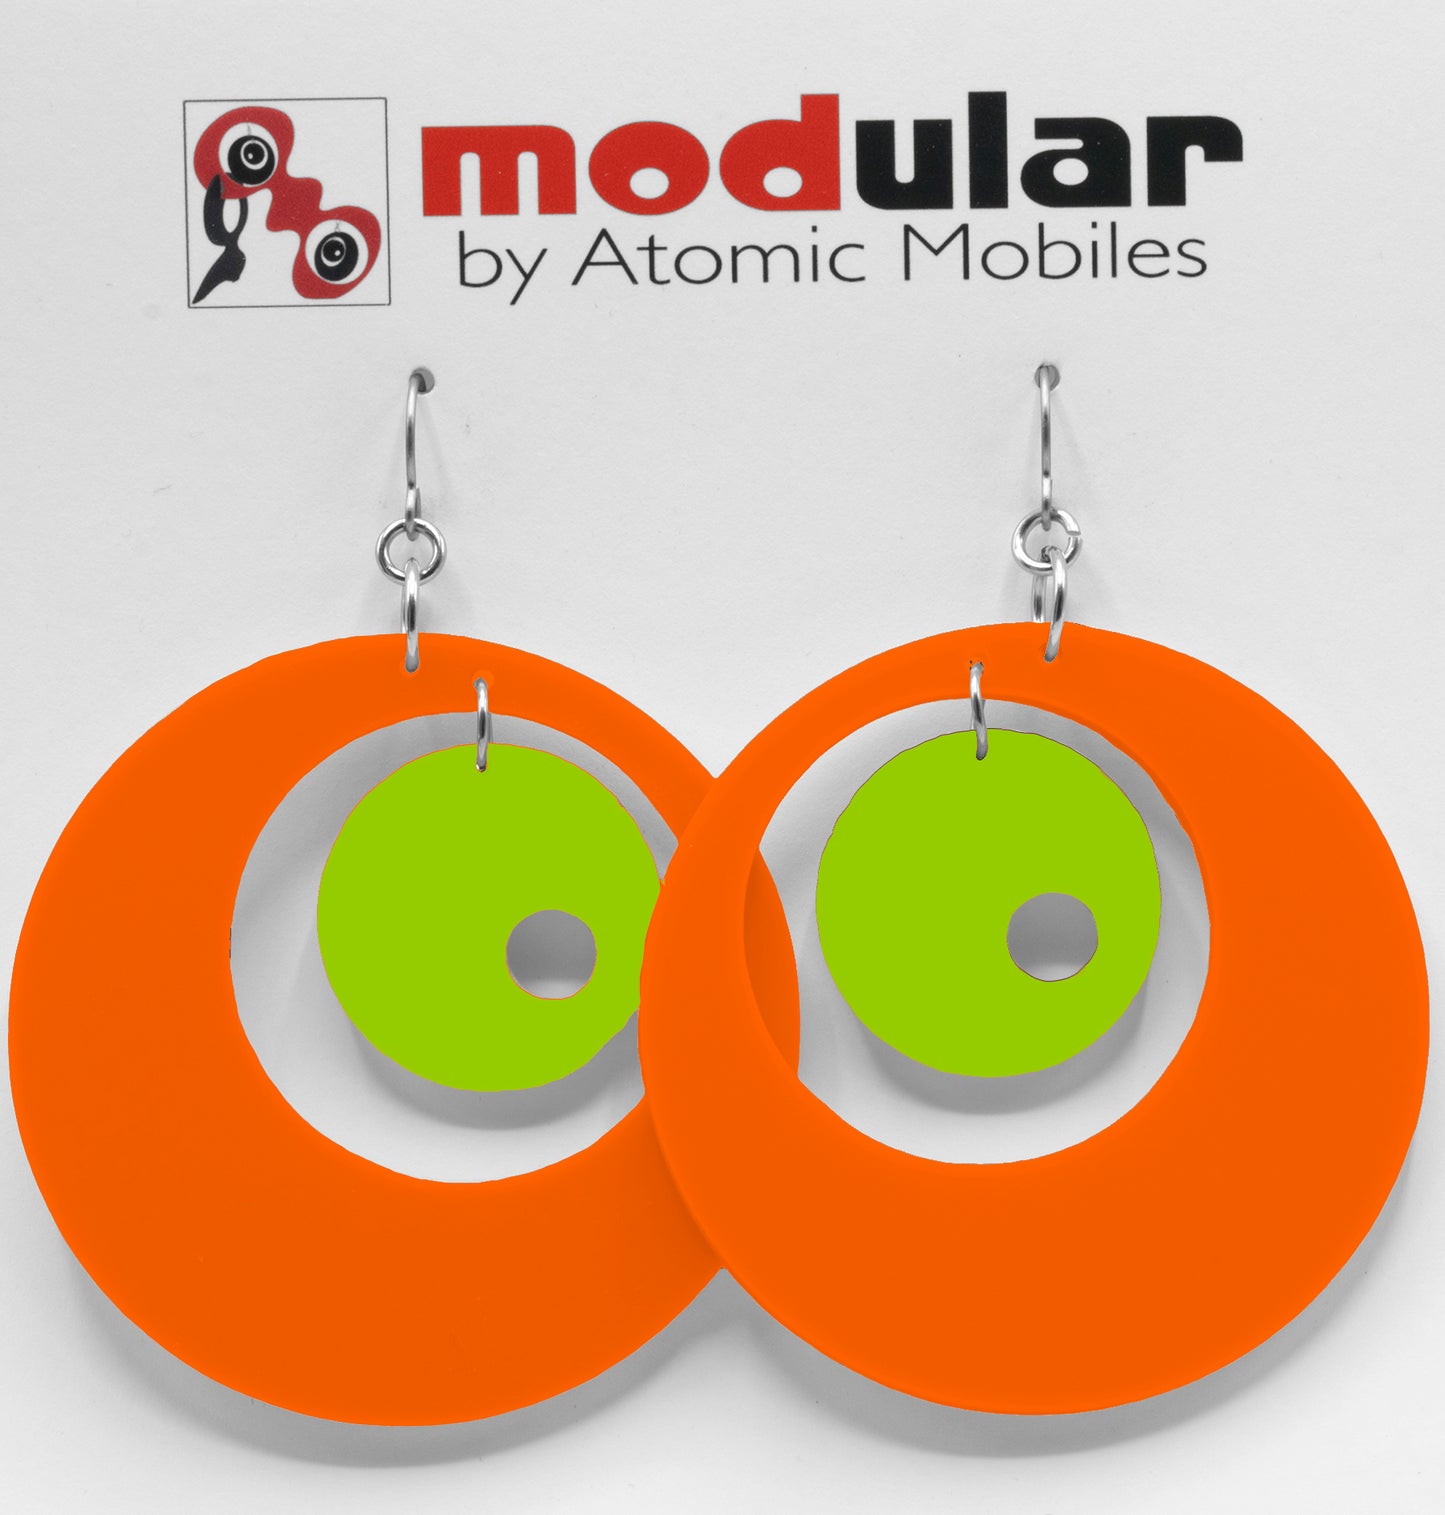 MODular Earrings - Groovy Statement Earrings in Orange and Lime by AtomicMobiles.com - retro era inspired mod handmade jewelry